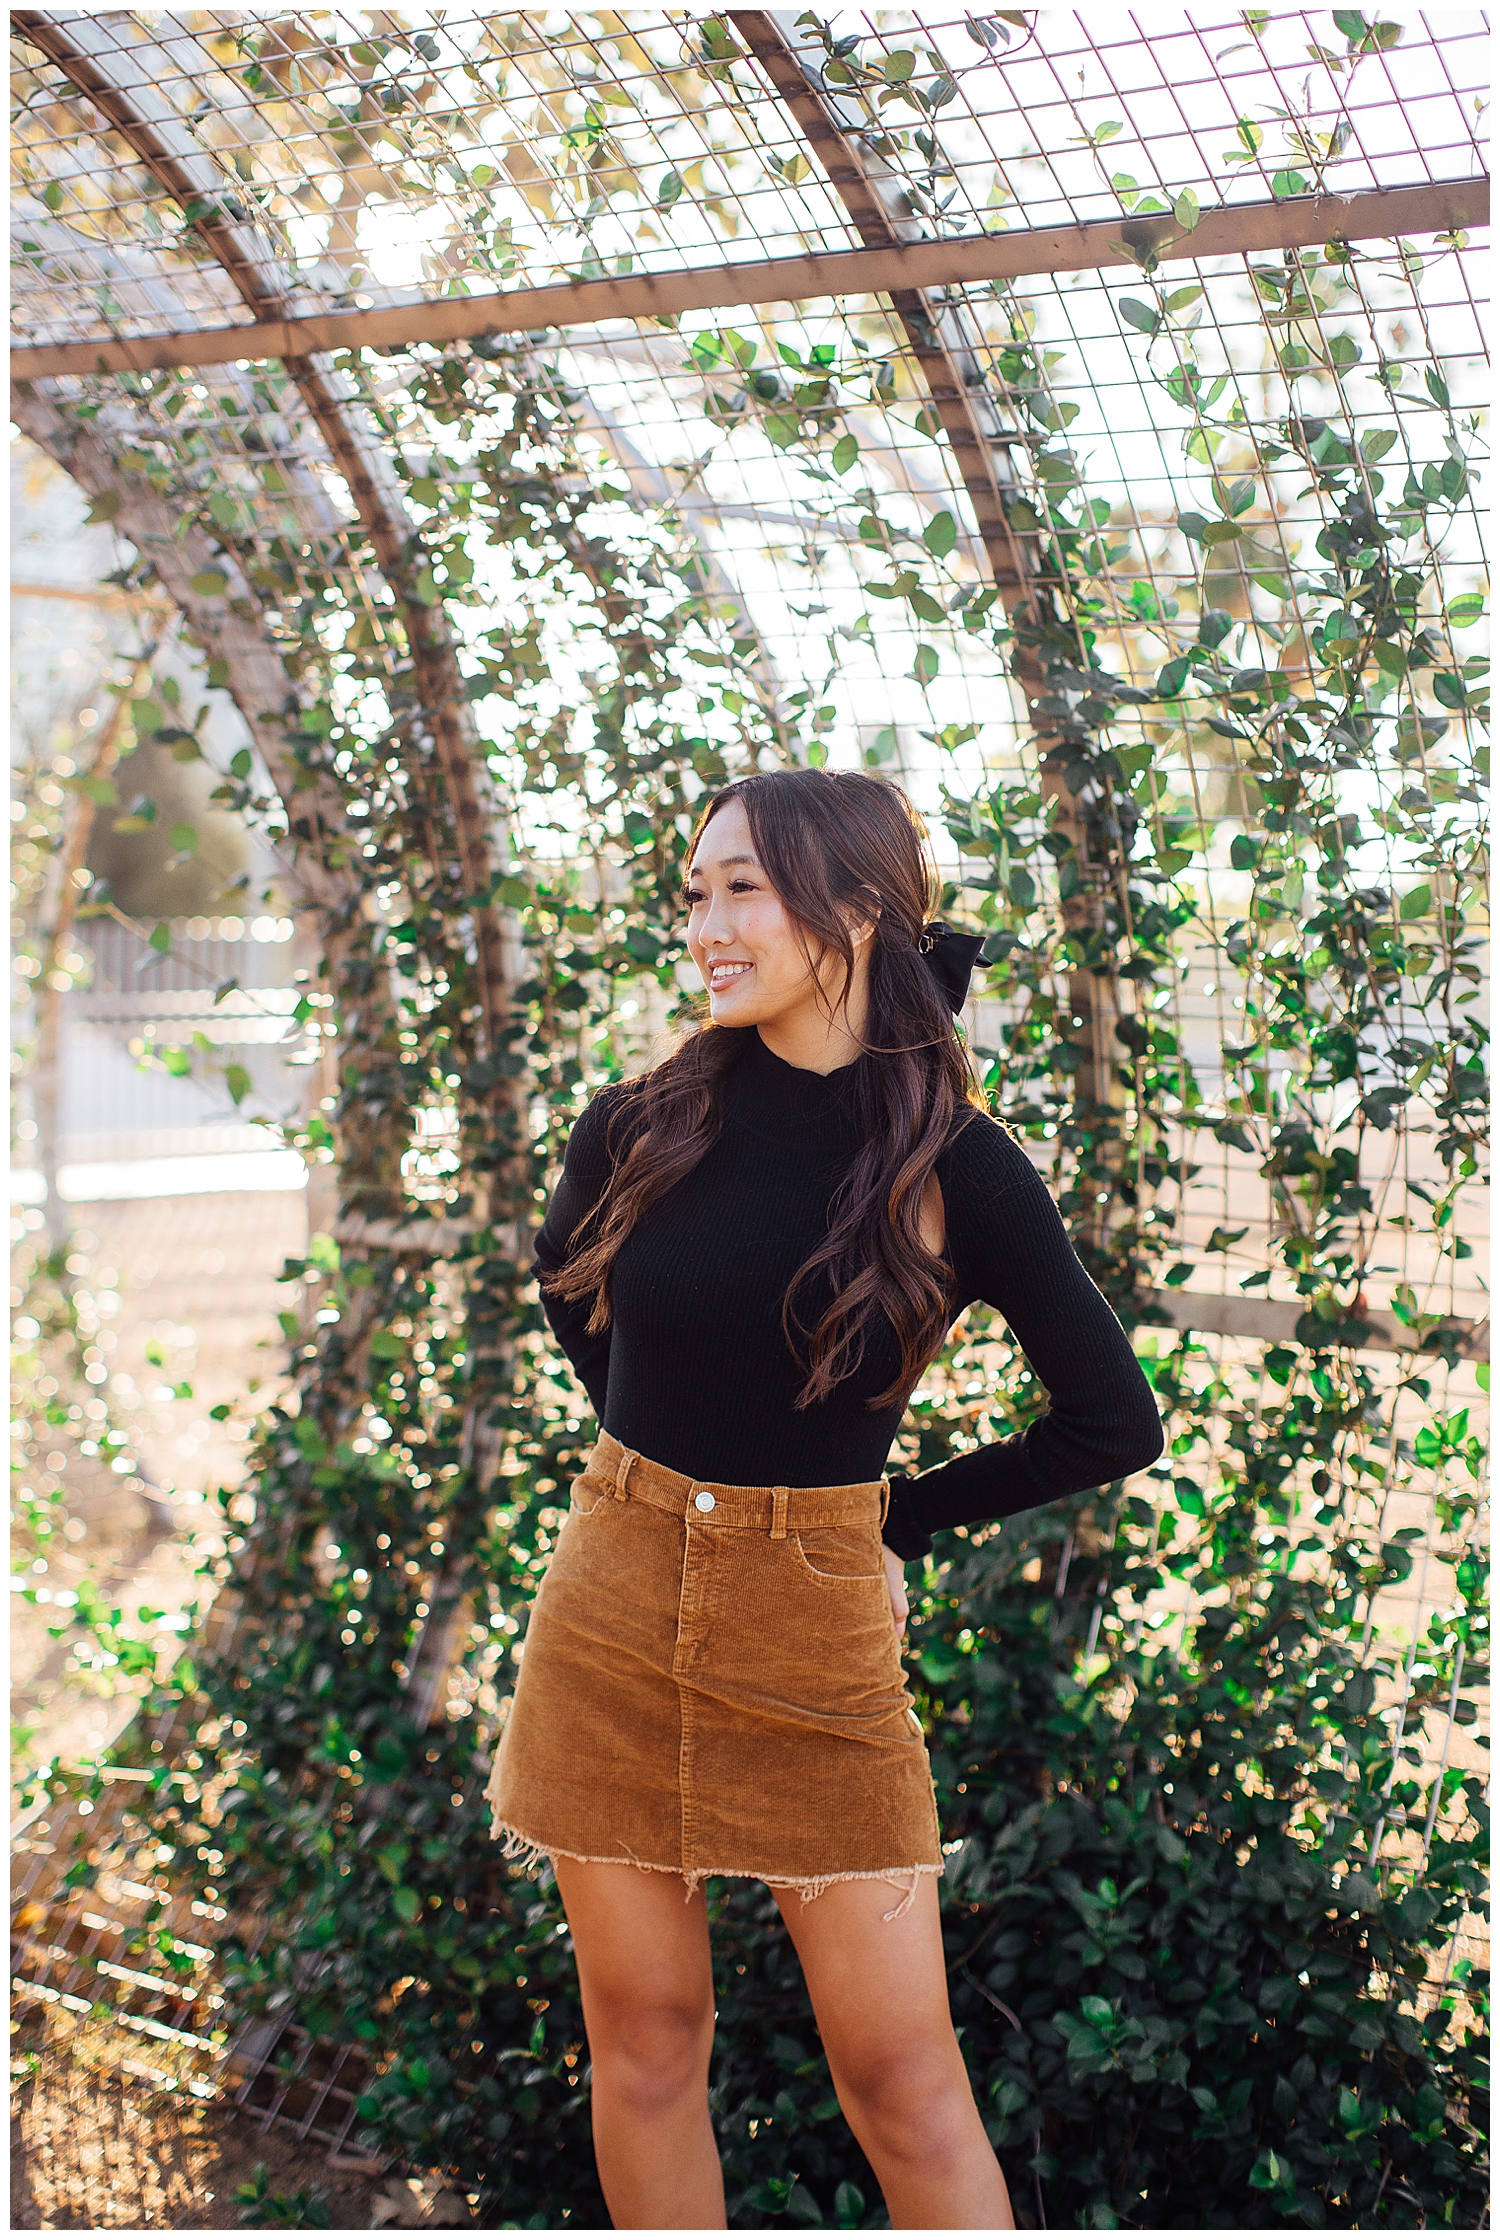 high school senior girl in black sweater and brown skirt standing in front of ivy garden arch downtown Houston